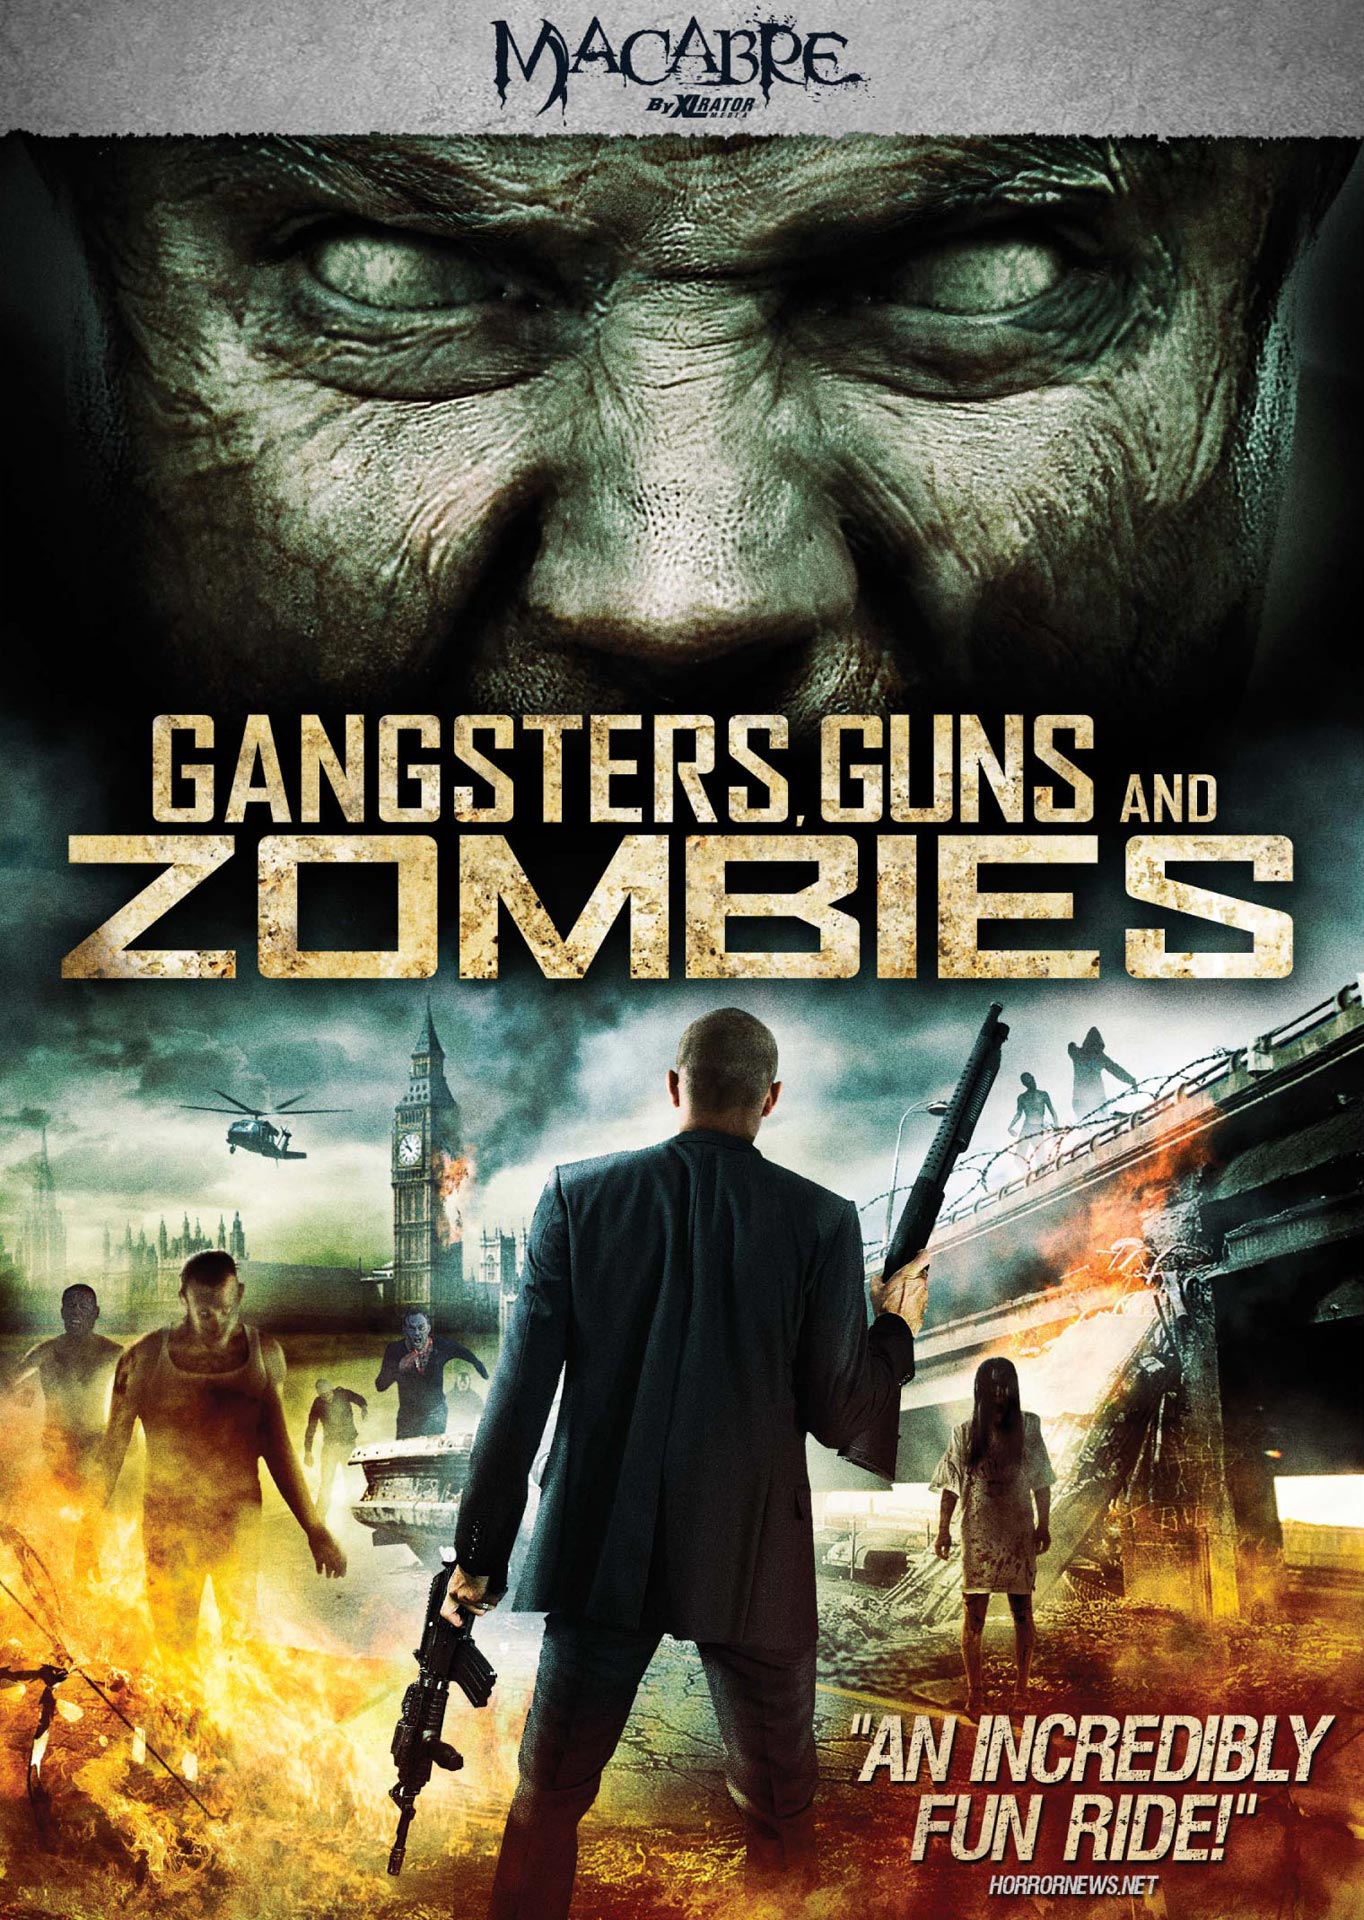 GANGSTERS GUNS ZOMBIES  Exclusive Clip and Poster  